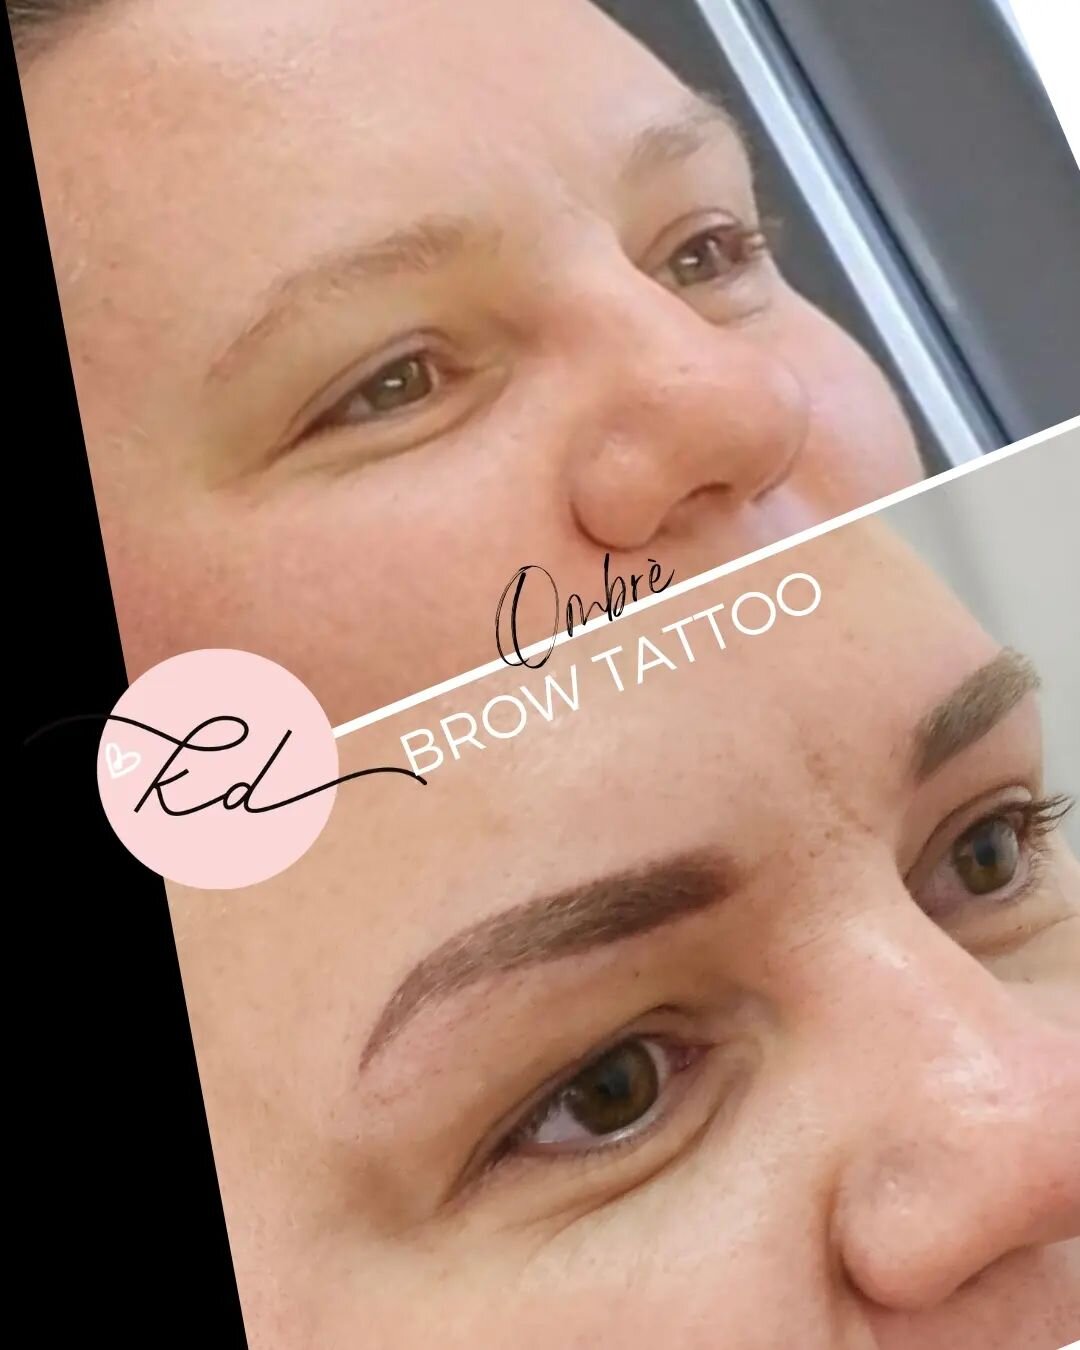 ✨️ Ombr&egrave; Brow Tattoo - before &amp; after ✨️

Healed brows will fade in colour by about 30% and the tattoo itself will shrink and not be the size as tattooed. 
Once healed, brows look natural due to pixelation and fading while matching your fe